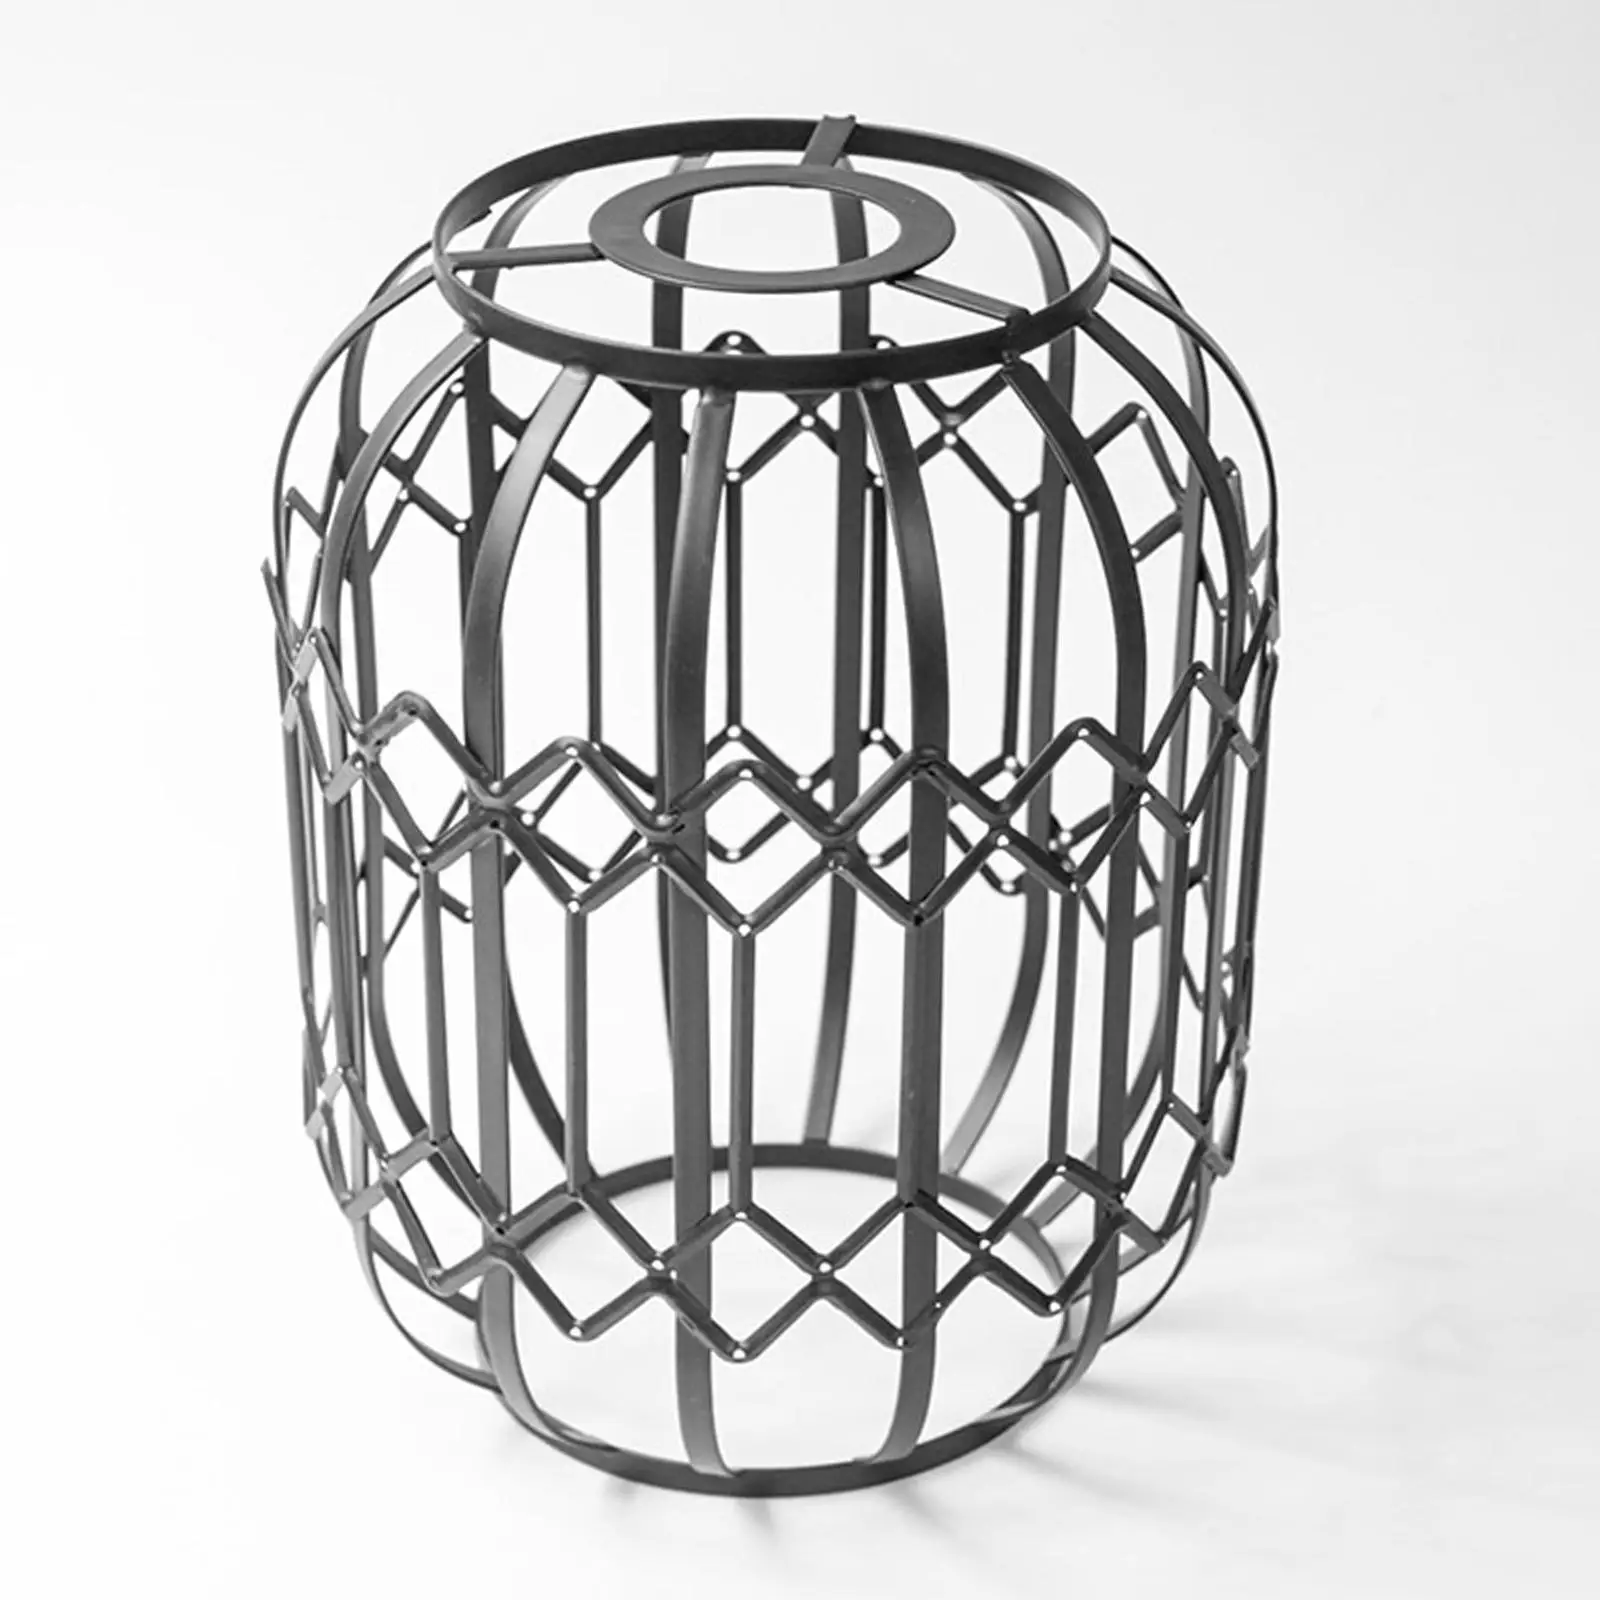 Light Bulb Cage Guard Metal Light Shade DIY Chandelier Lampshade Black Anti Rust for Home Bar Bird Cage Shaped Craft Accessories